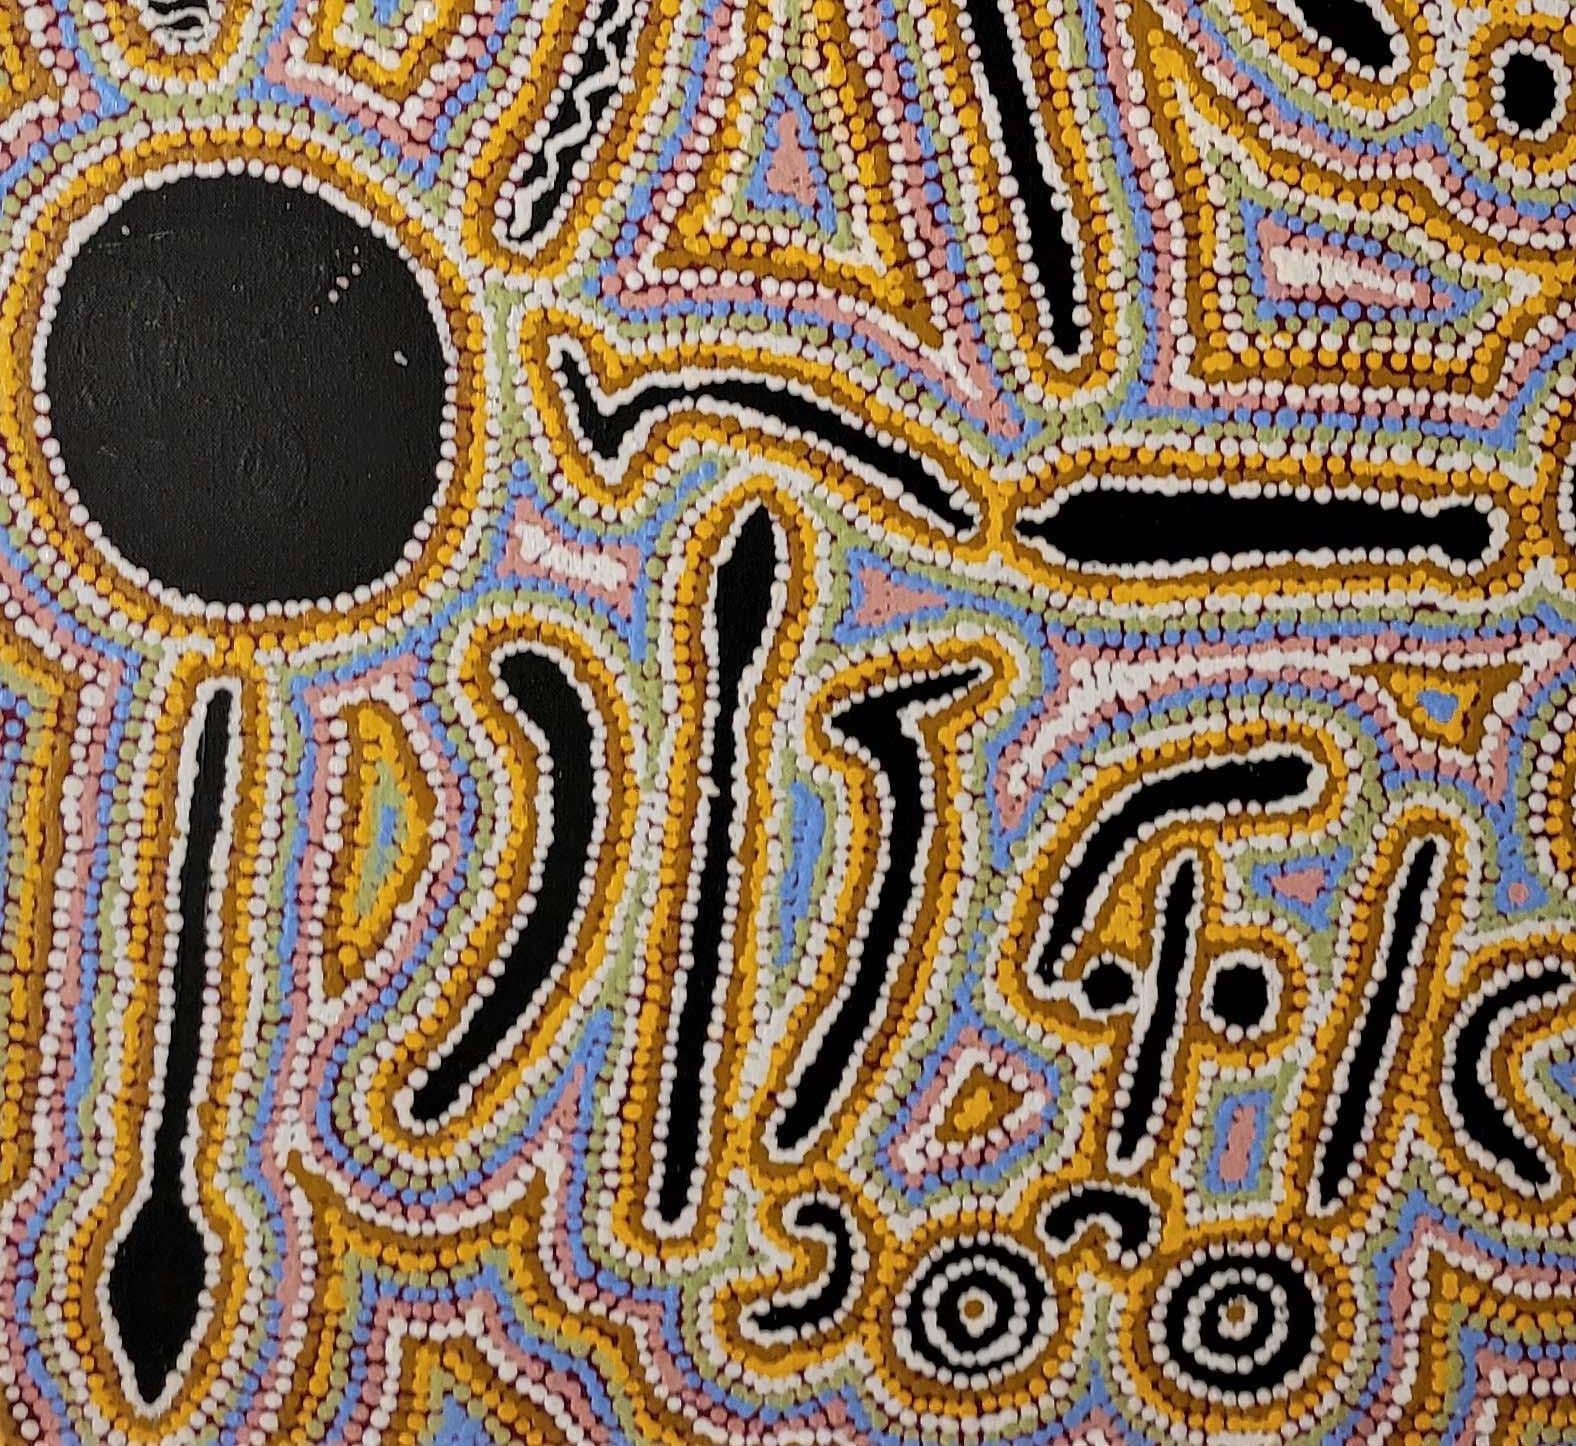 Paddy Japaljarri Stewart came from Mungapunju in Australia, just south of Yuendumu in the Northern Territory. As a young man he worked on cattle properties at Mount Allen, Mount Dennison and other parts of Australia's 'top end'. He acquired the